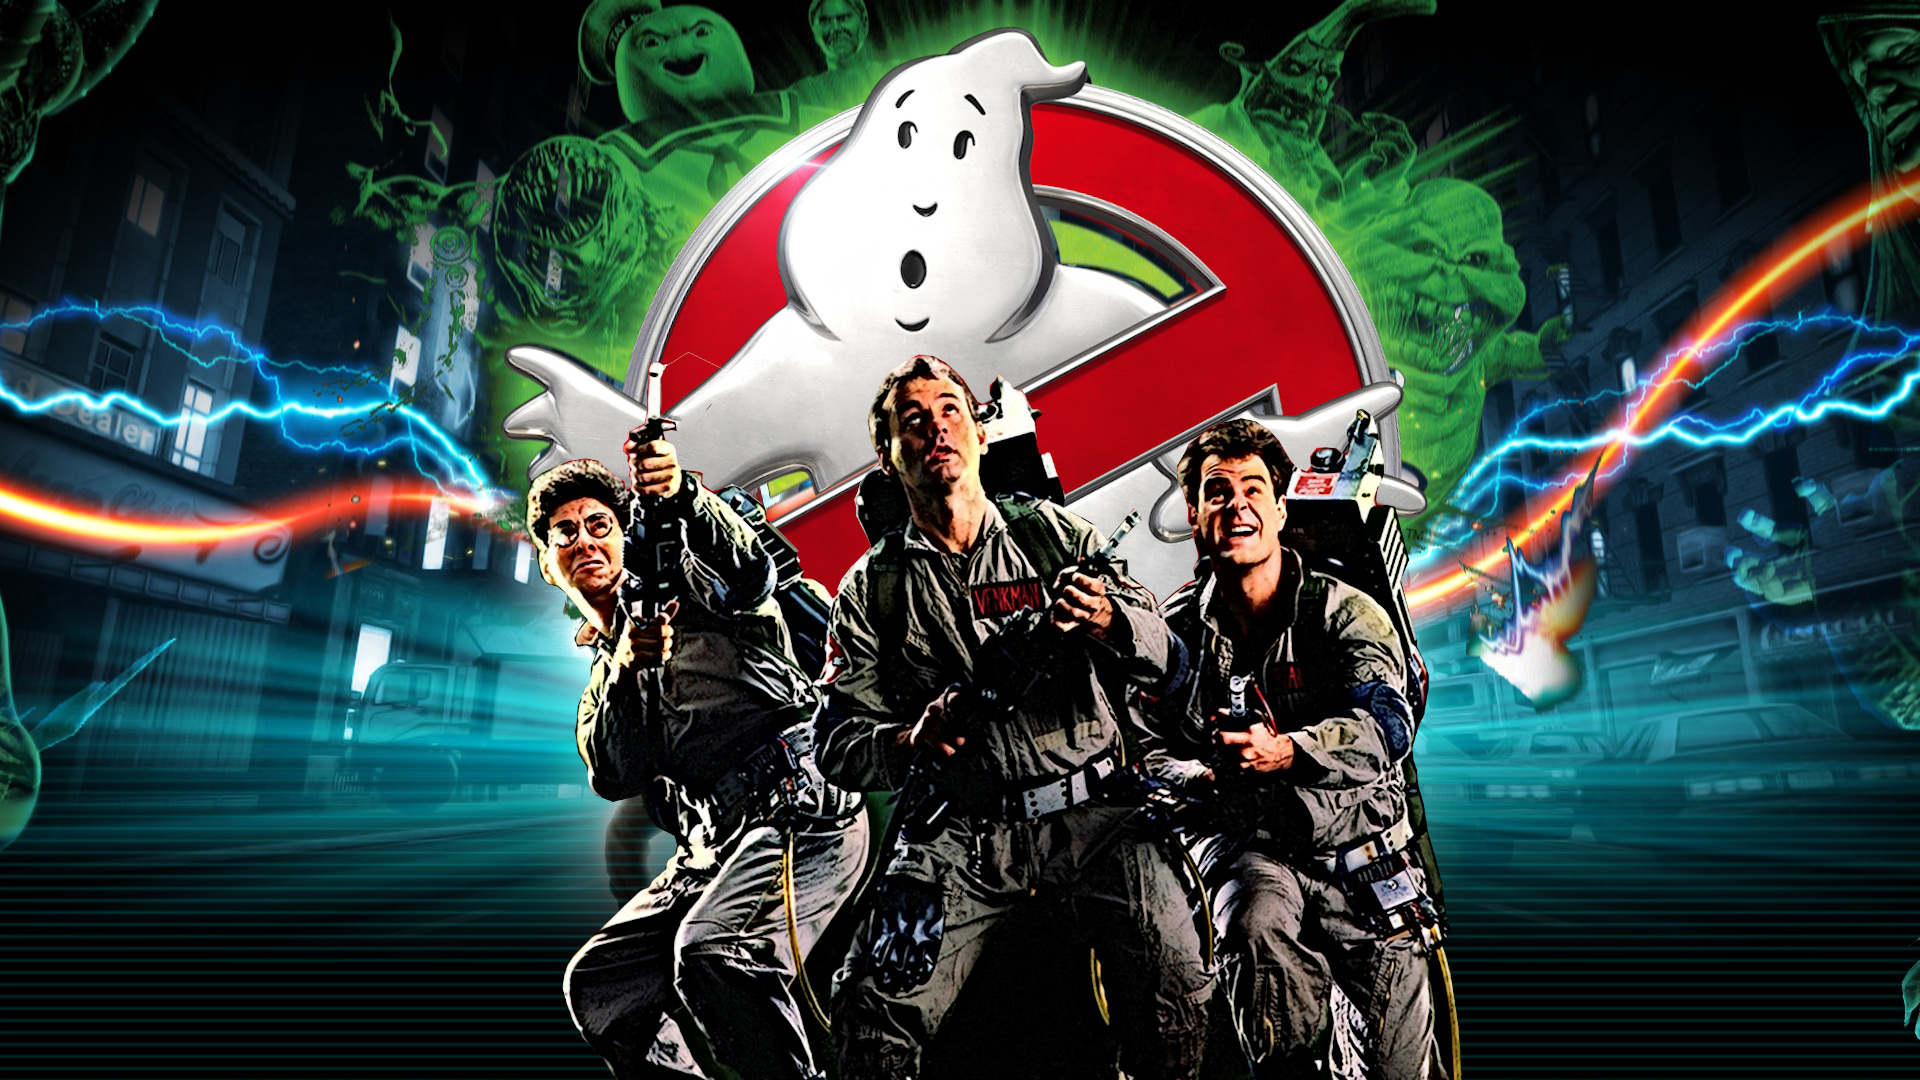 Ghostbusters LE PuPPack